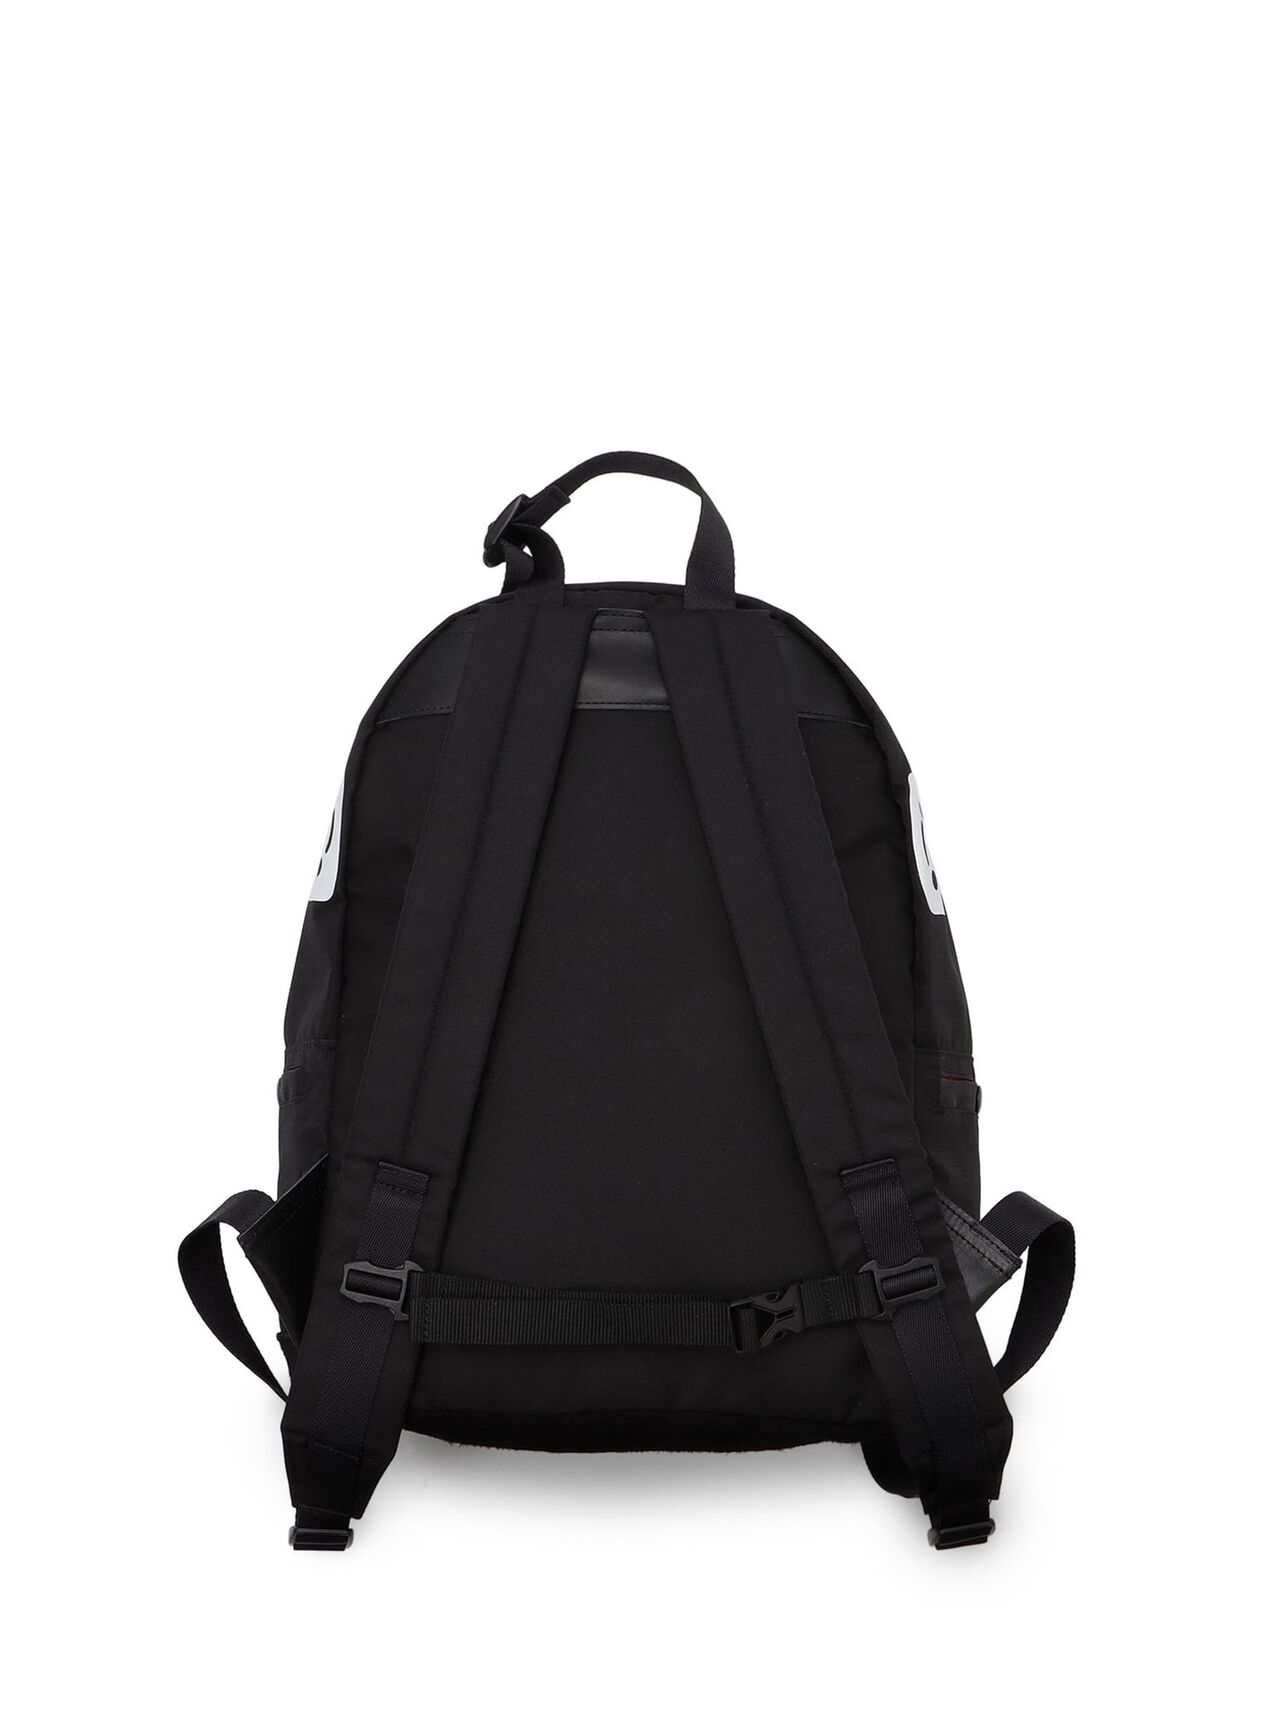 CUNE backpack in Cordura R with leather bottom M,ONE, large image number 1